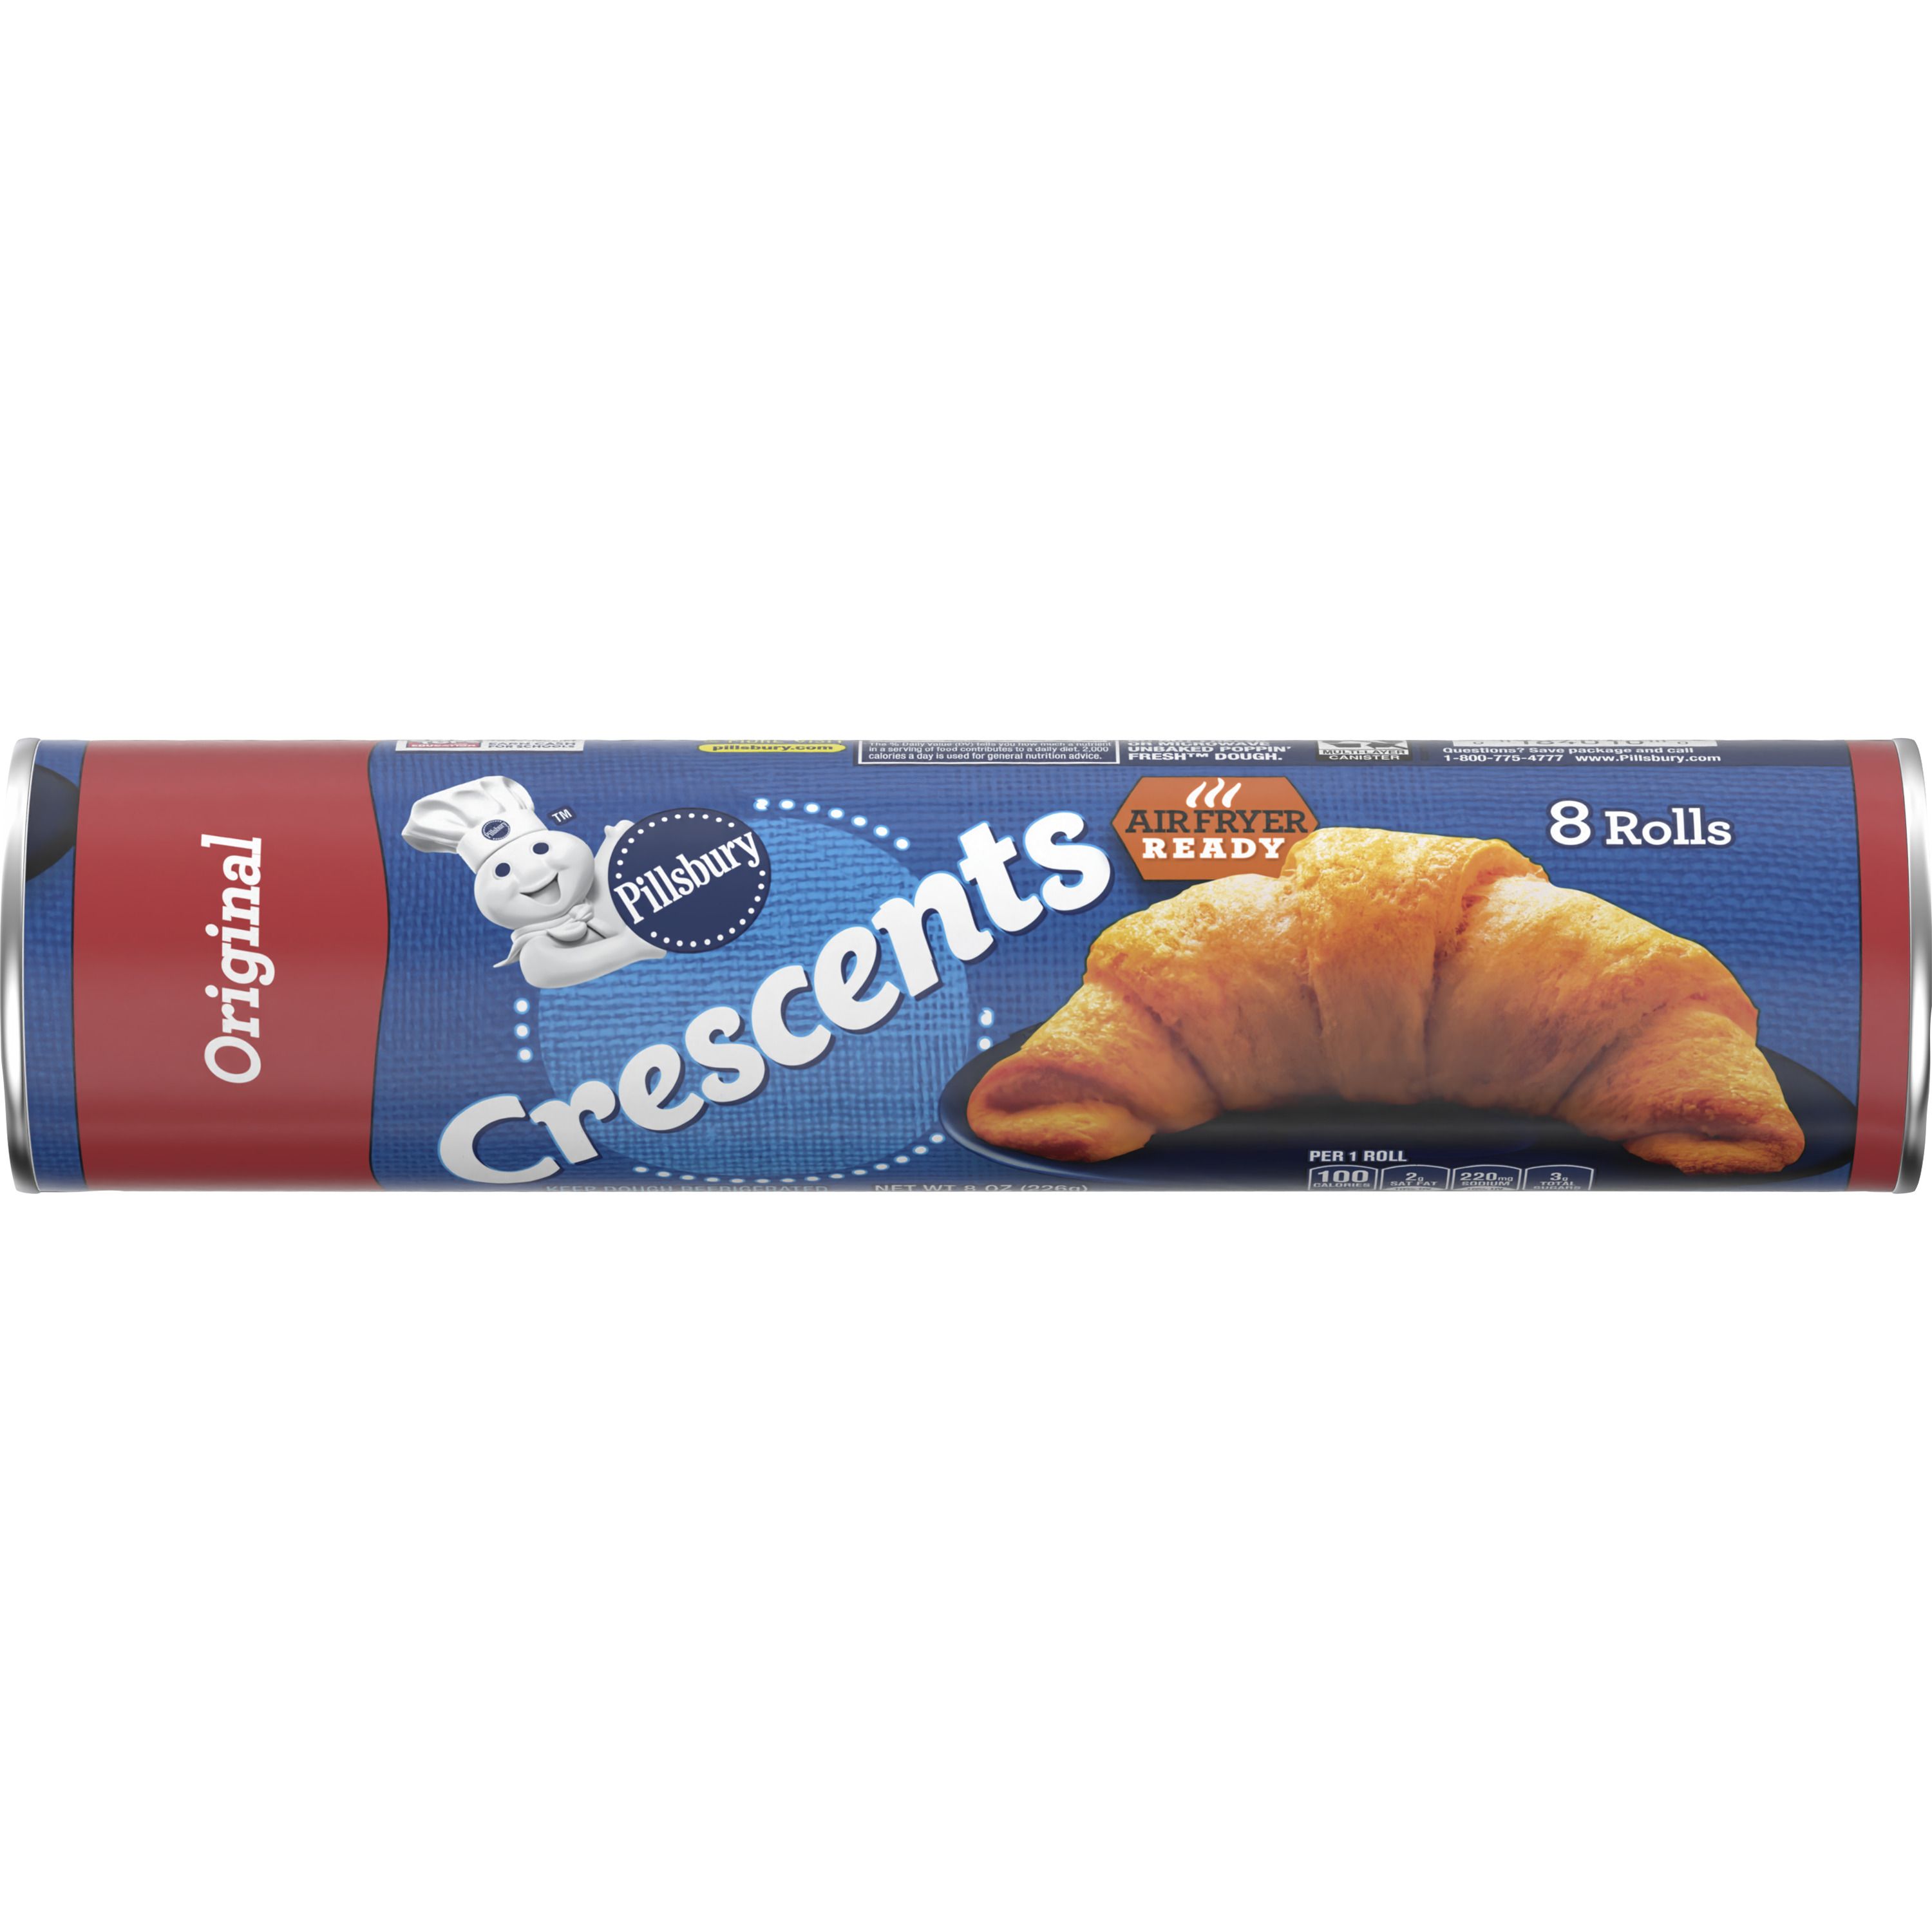 Pillsbury Crescent Rolls, Original Refrigerated Canned Pastry Dough, 8 Rolls, 8 oz - Front